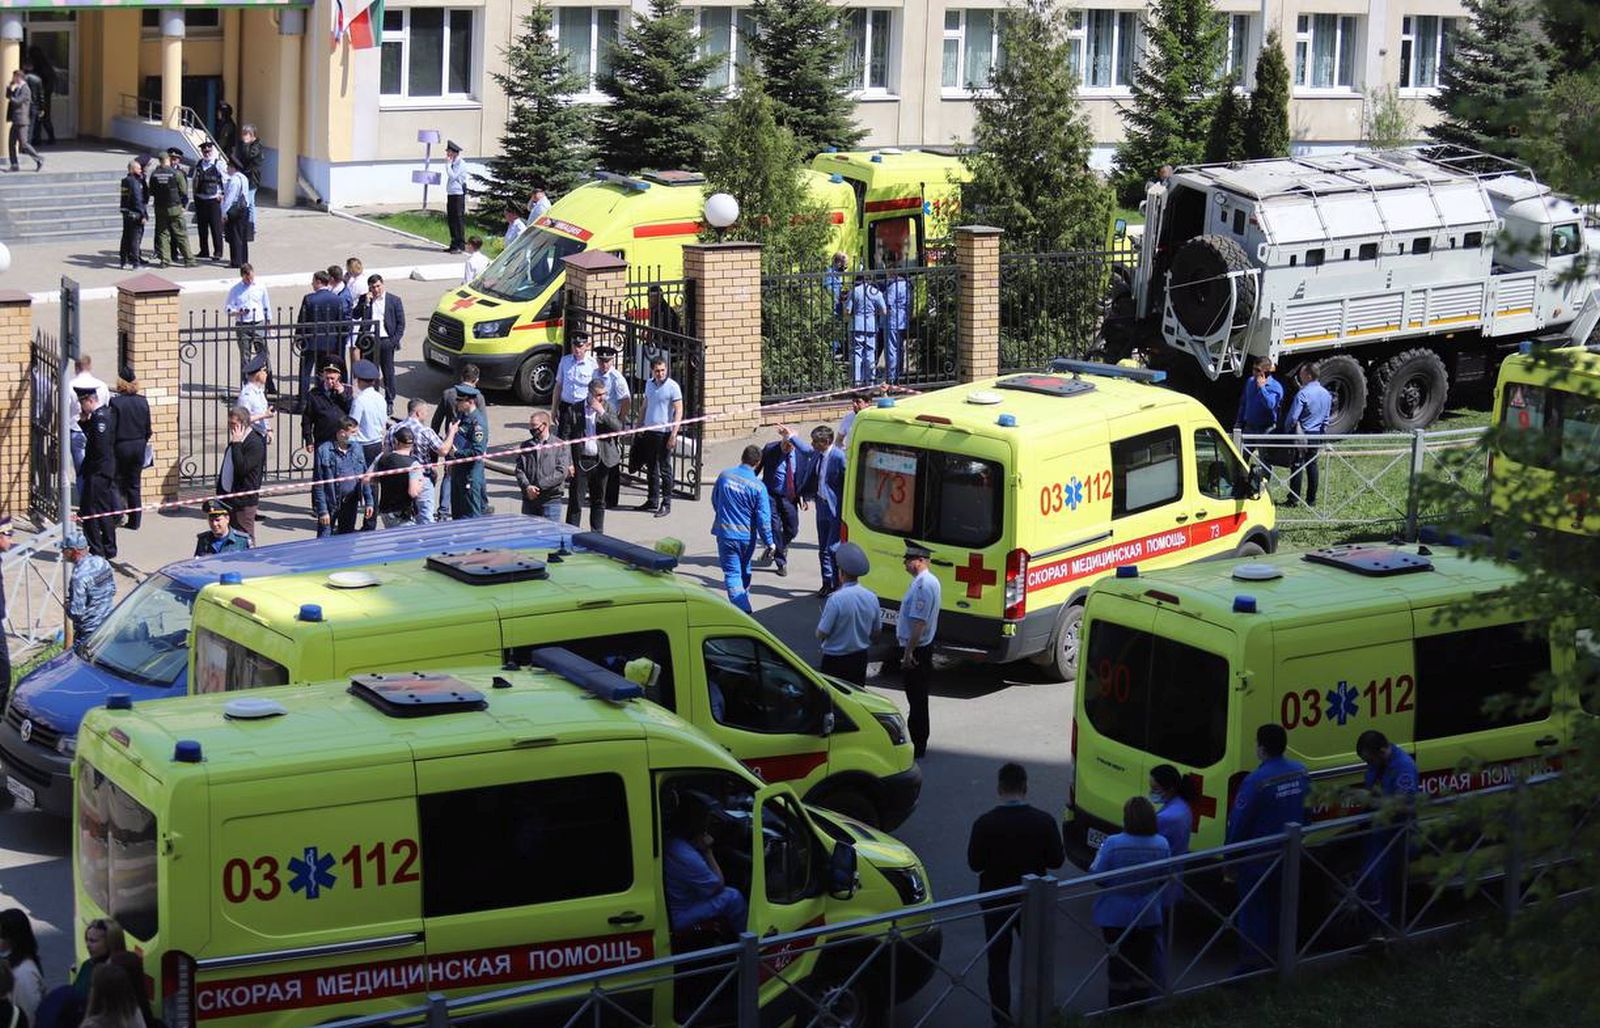 epa09190826 Ambulances and police cars gather outside a school in the aftermath of a shooting, in Kazan, Russia, 11 May 2011. The state news media reported that at least 11 people were killed in the shooting at the school.  EPA/Anton Raykhshtat